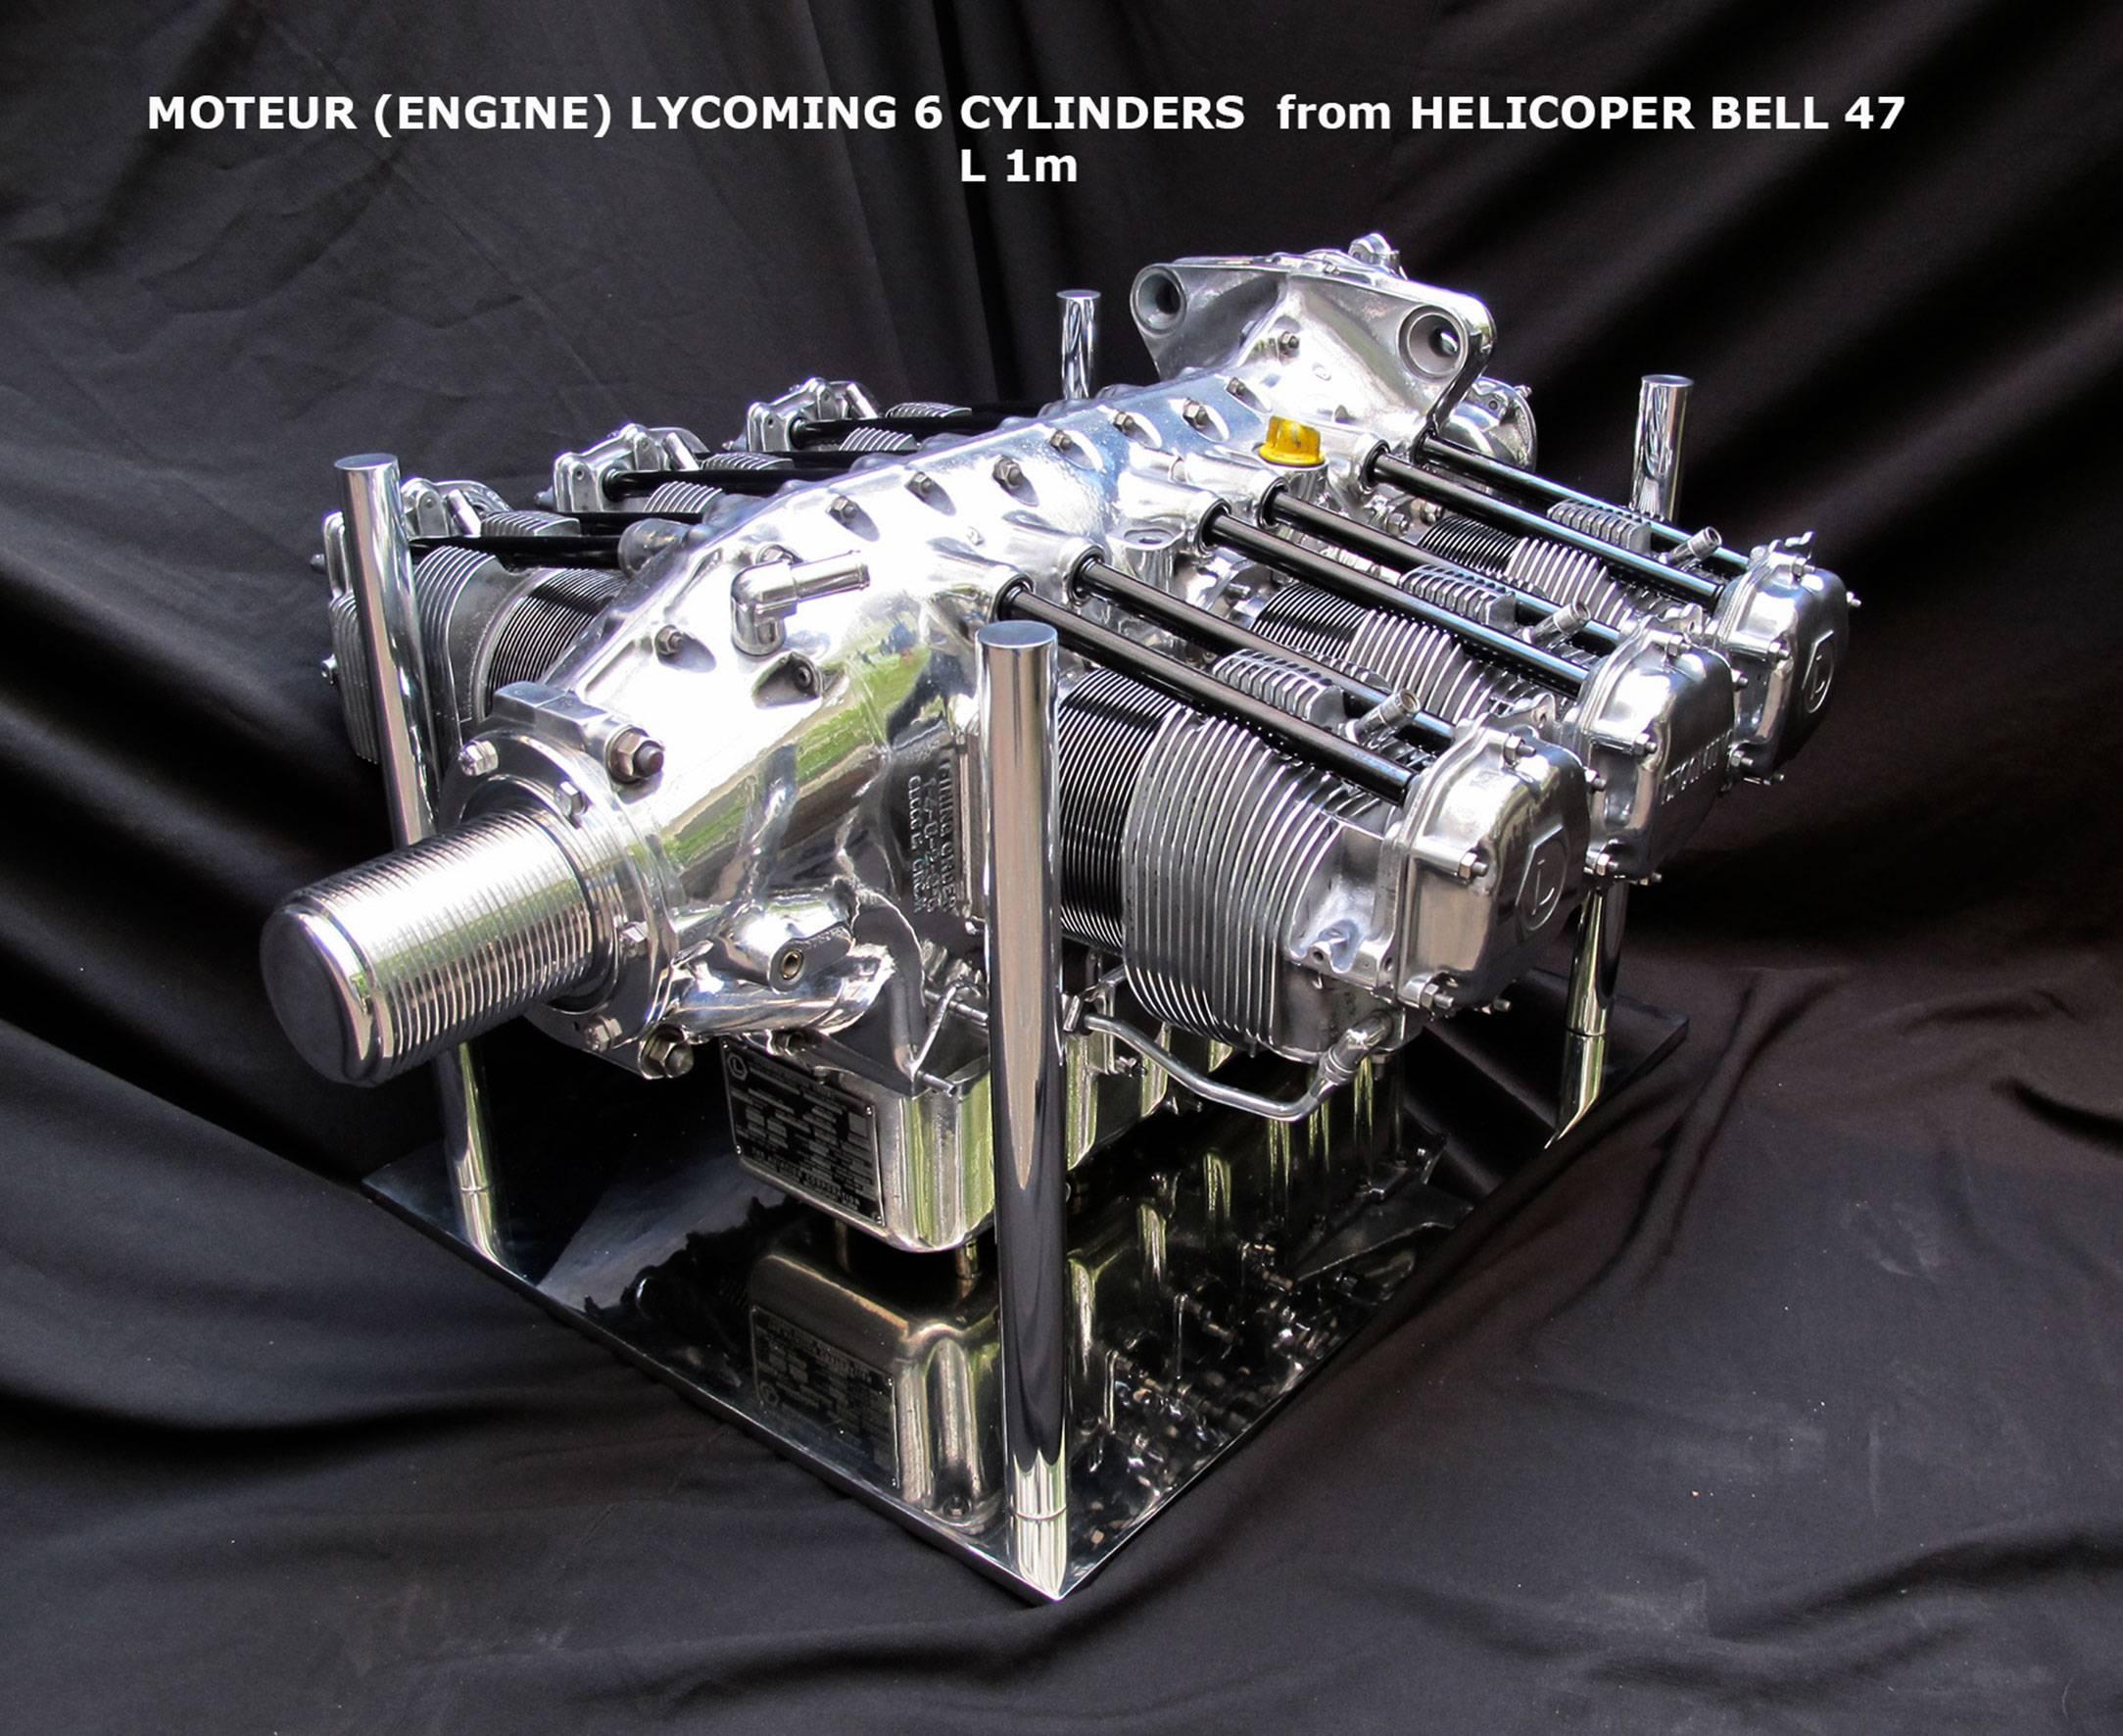 Aviation furniture coffee table with Lycoming Engine by Jean-Pierre Carpentier
AVIATIONSPIRIT  - Aeronautical furniture coffee table with one bell 47 helicopter Lycoming engine.
Aircraft table.
The Lycoming O-435 is a six-cylinder, horizontally